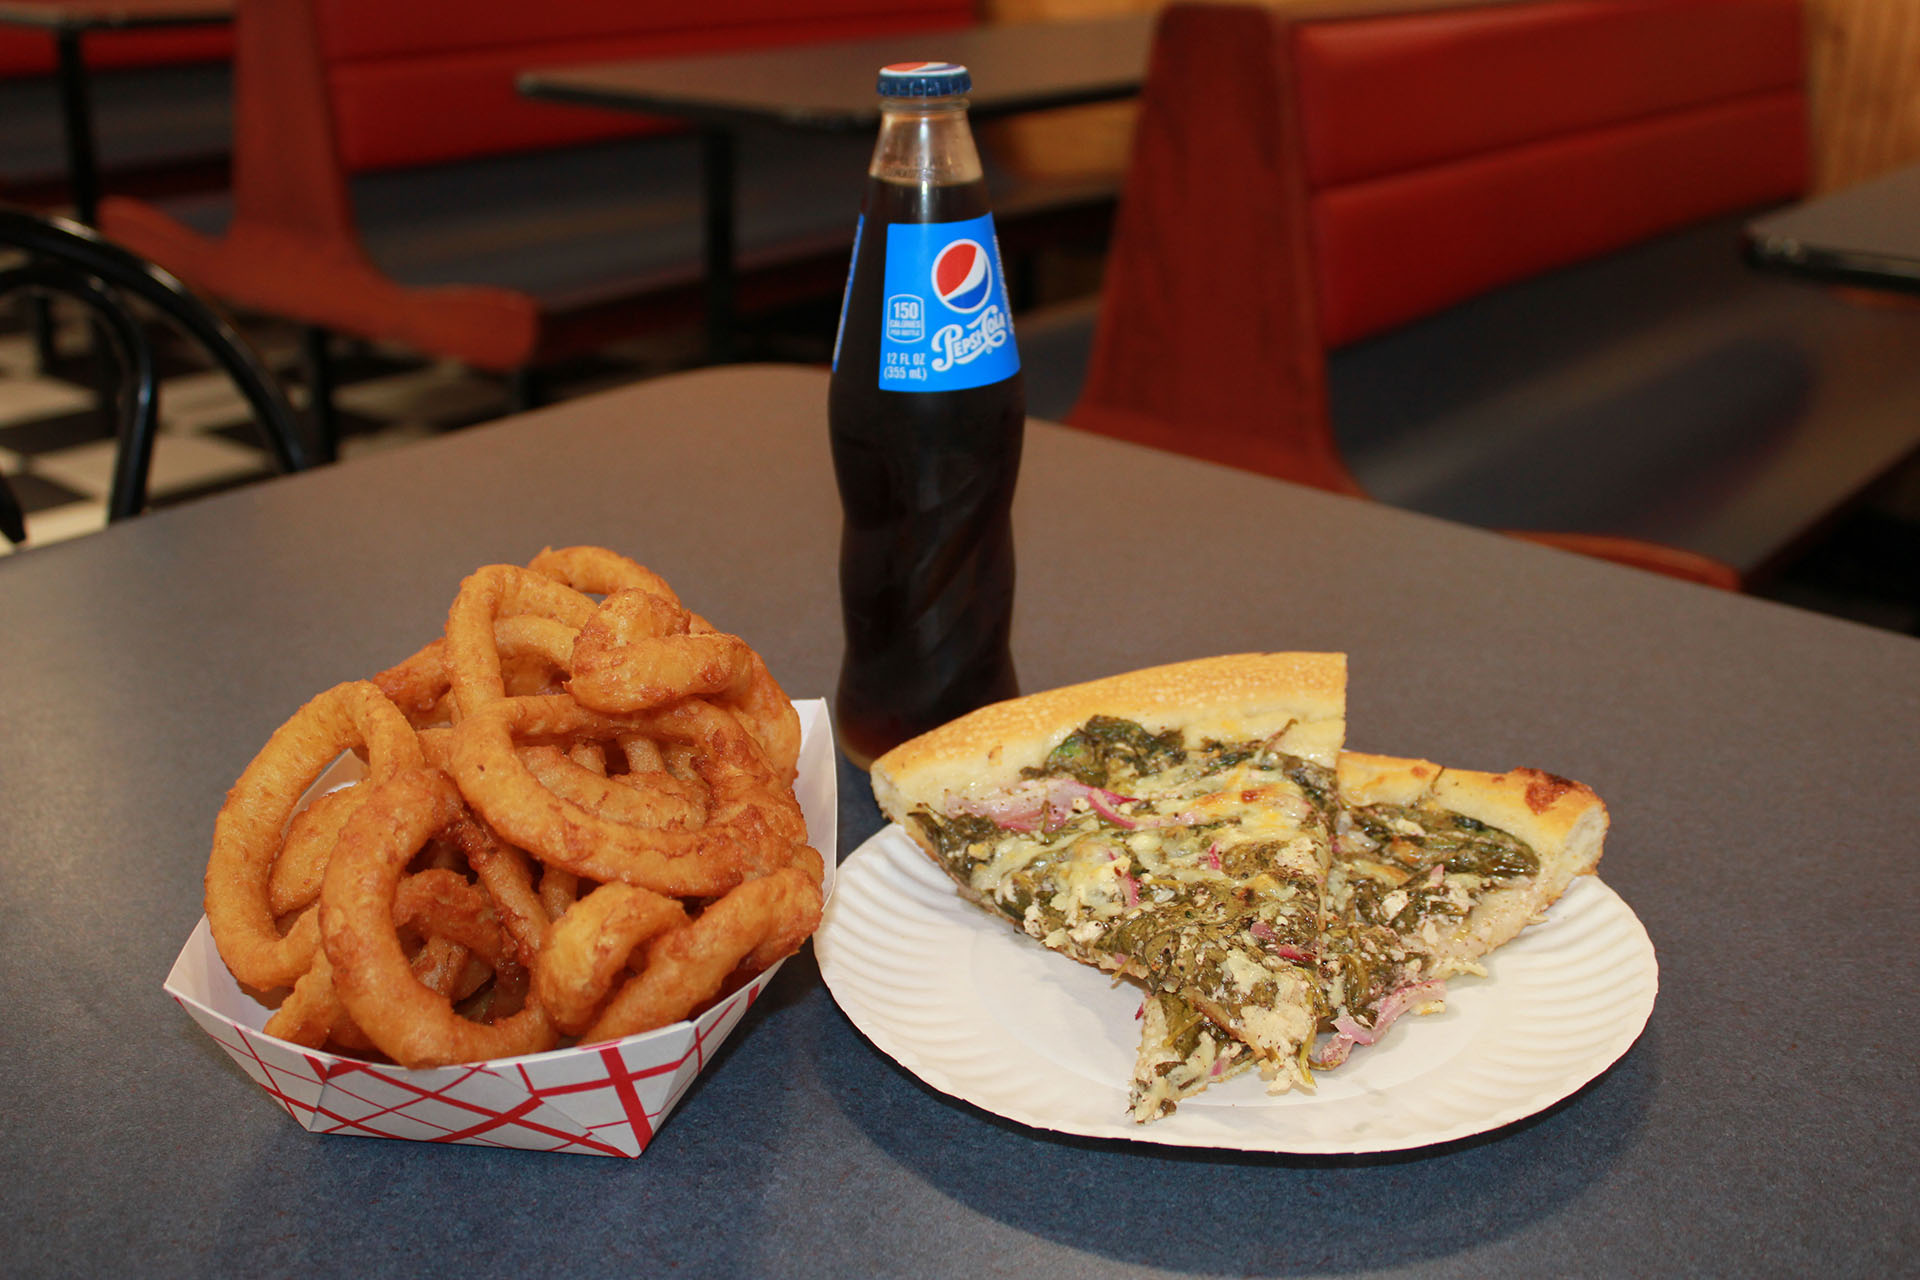 Have a drink, onion rings, and pizza.